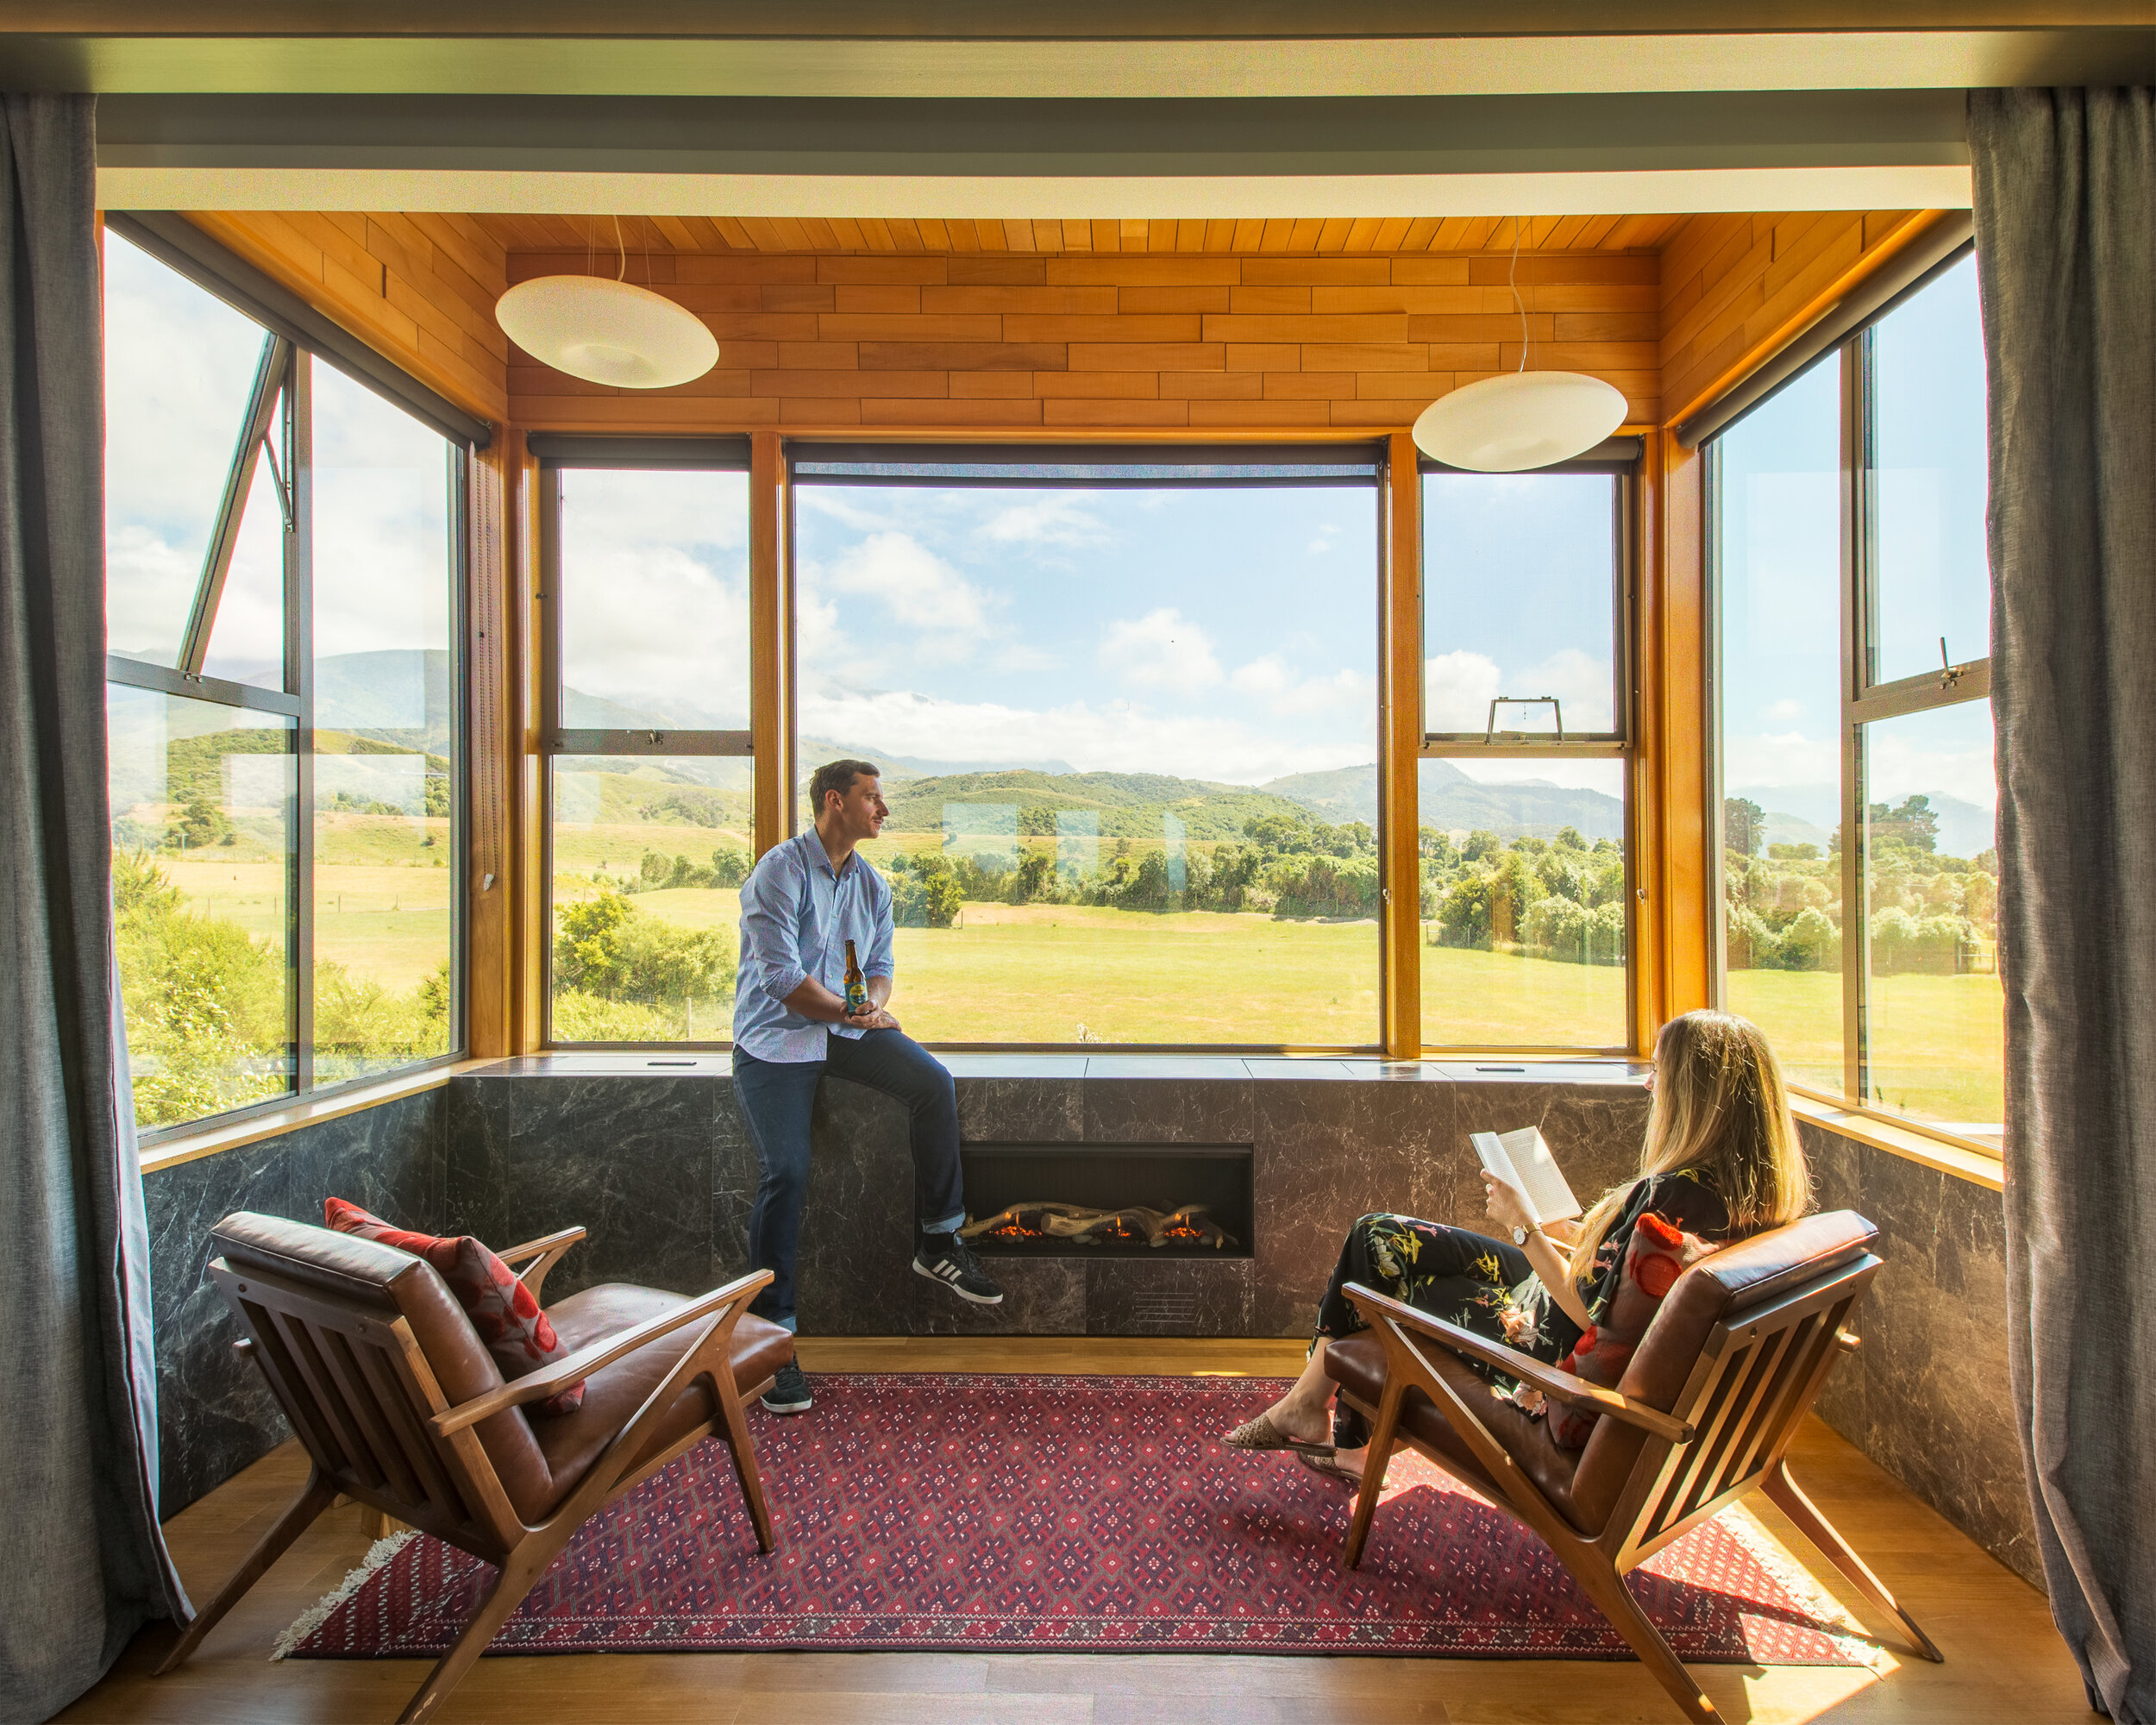 Perched above the tree tops, view the Kaikoura Ranges to the West and Pacific Ocean to the East